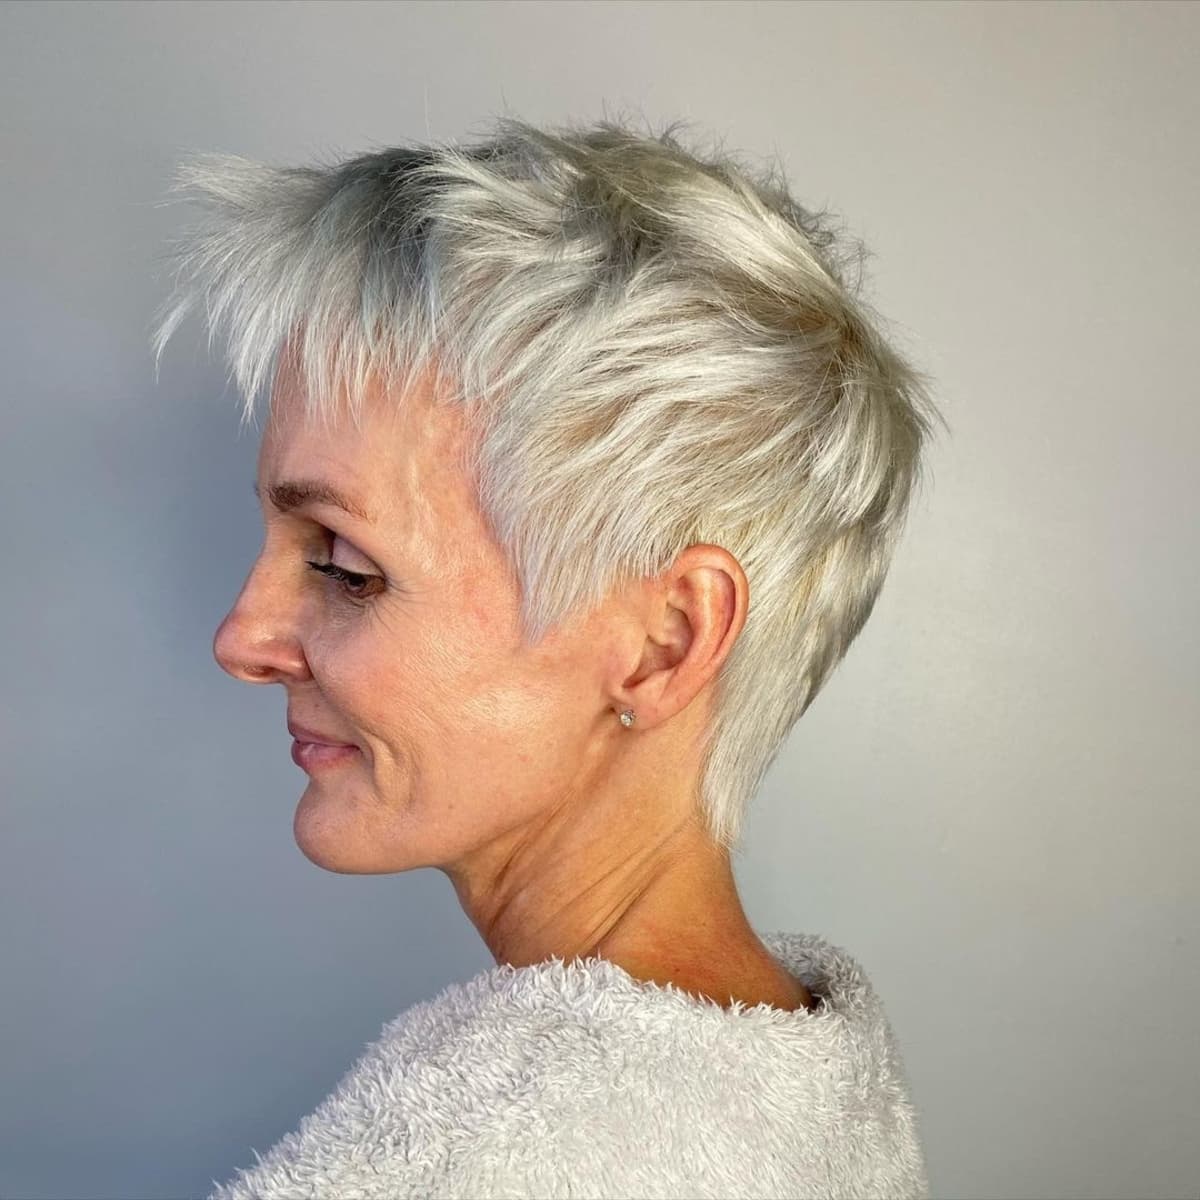 15 Best Pixie Haircuts for Women Over 60 (2021 Trends)